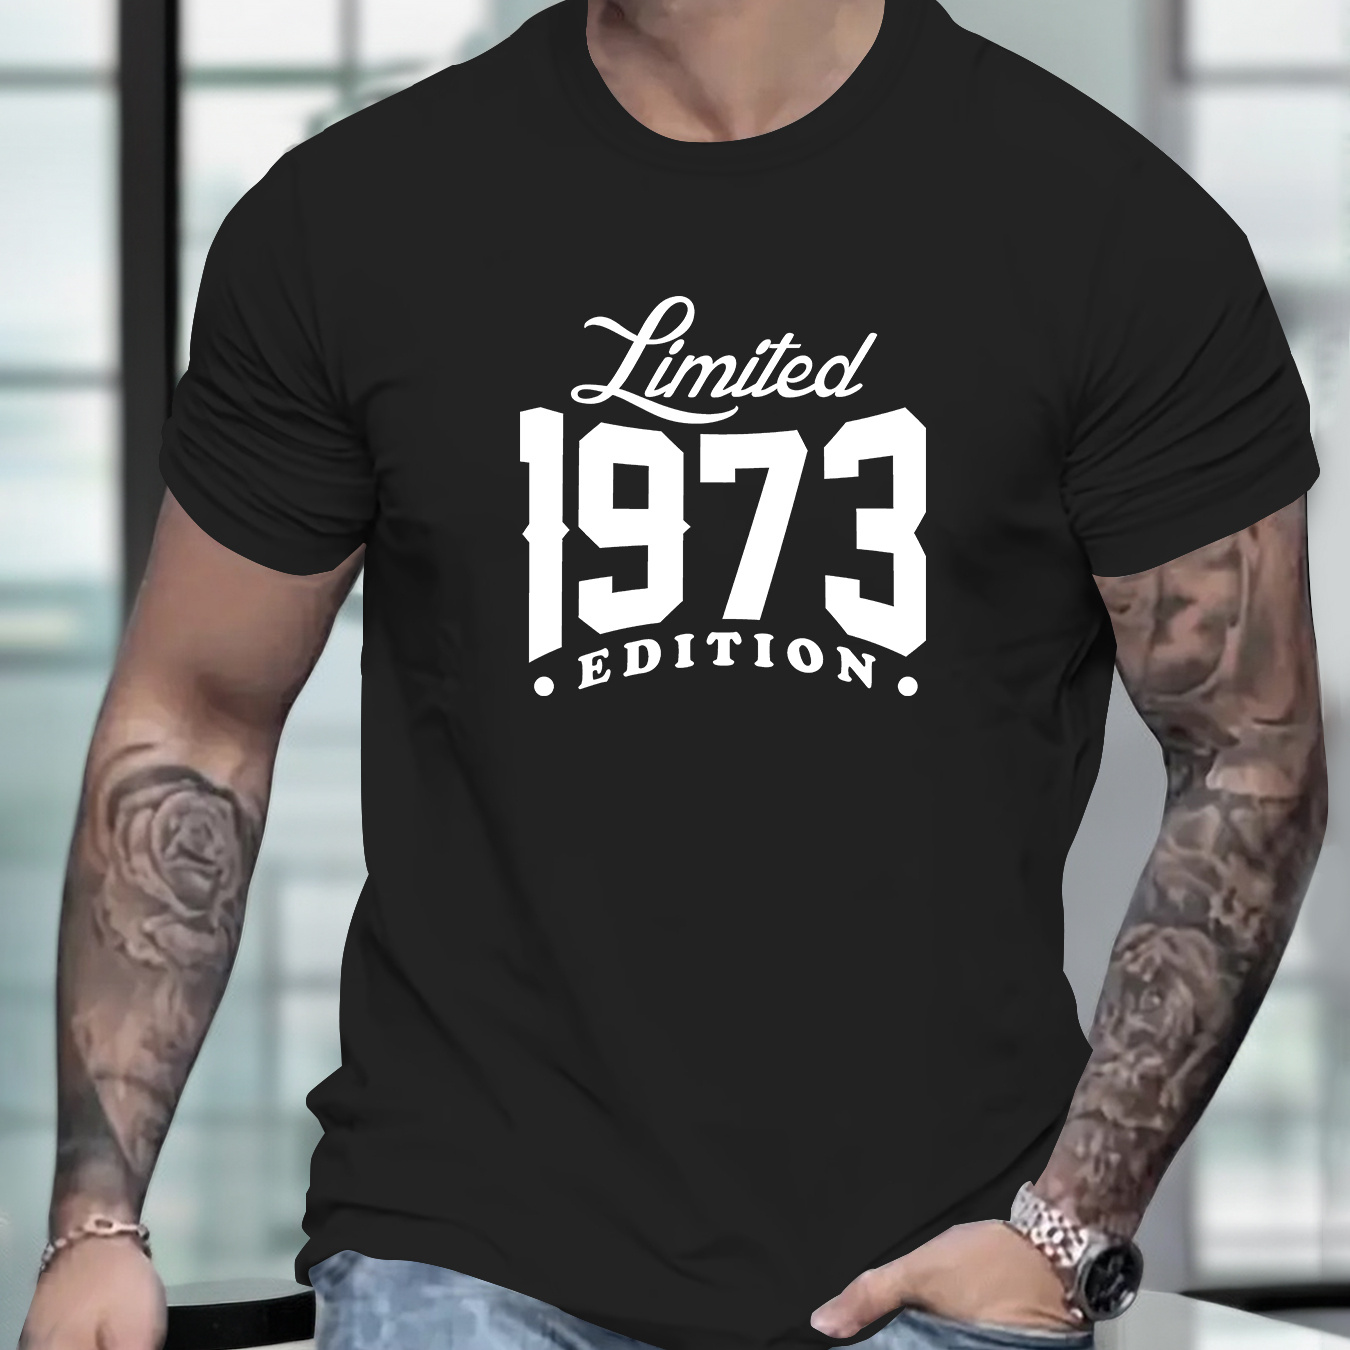 

Limited 1973 Edition Letter Print Men's T-shirt, Crew Neck Short Sleeve Tees For Summer, Casual Comfortable Versatile Top For Outdoor Sports Daily Street